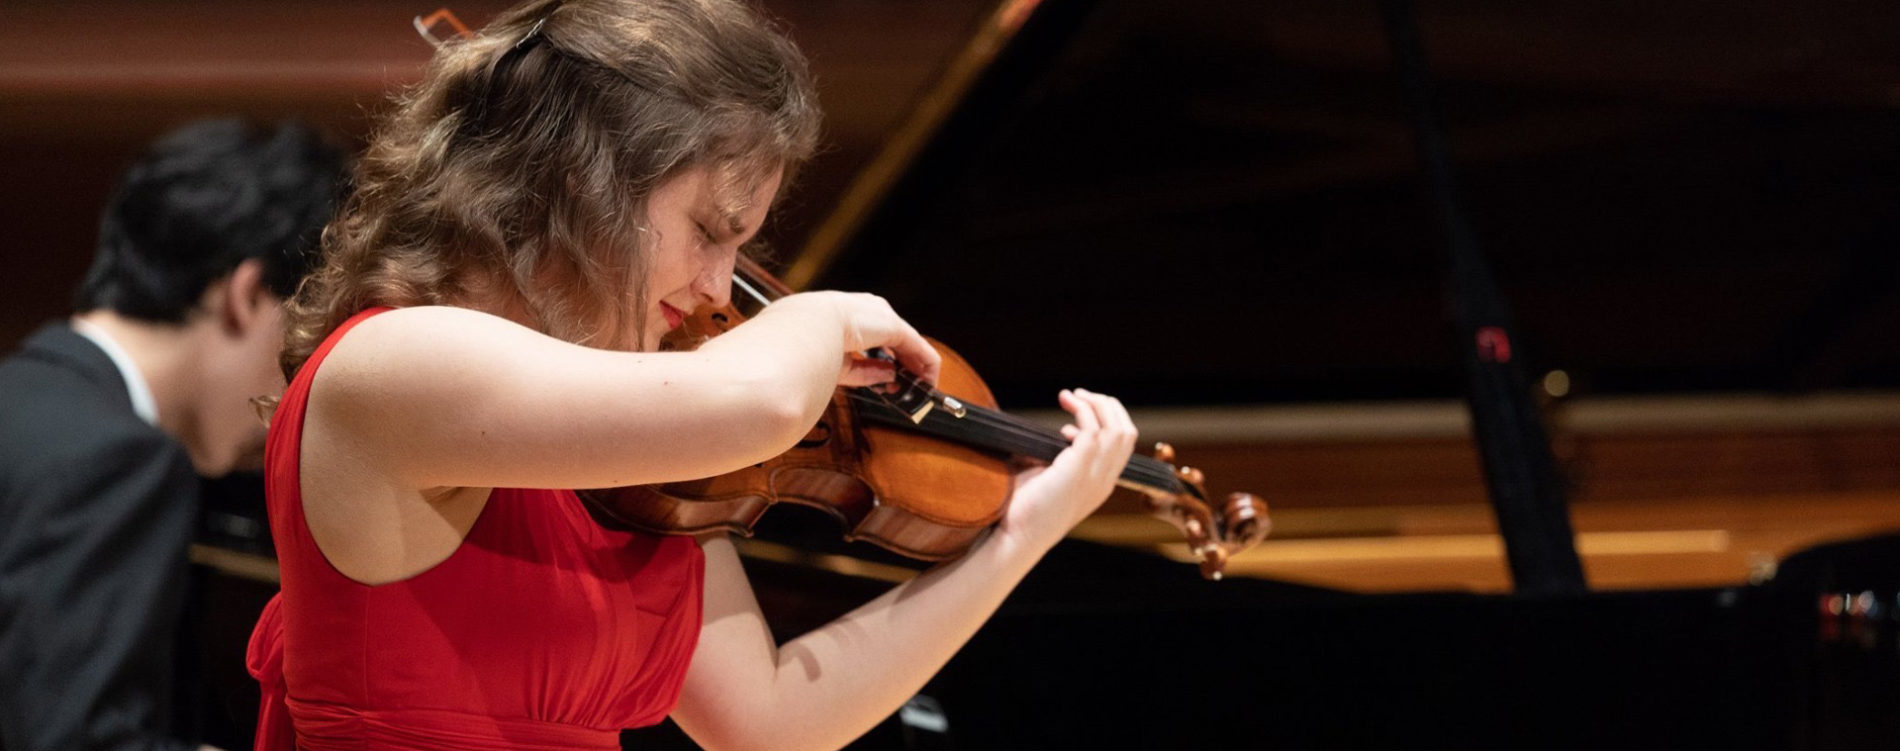 Chicago Violin Competition Online International Violin Competition